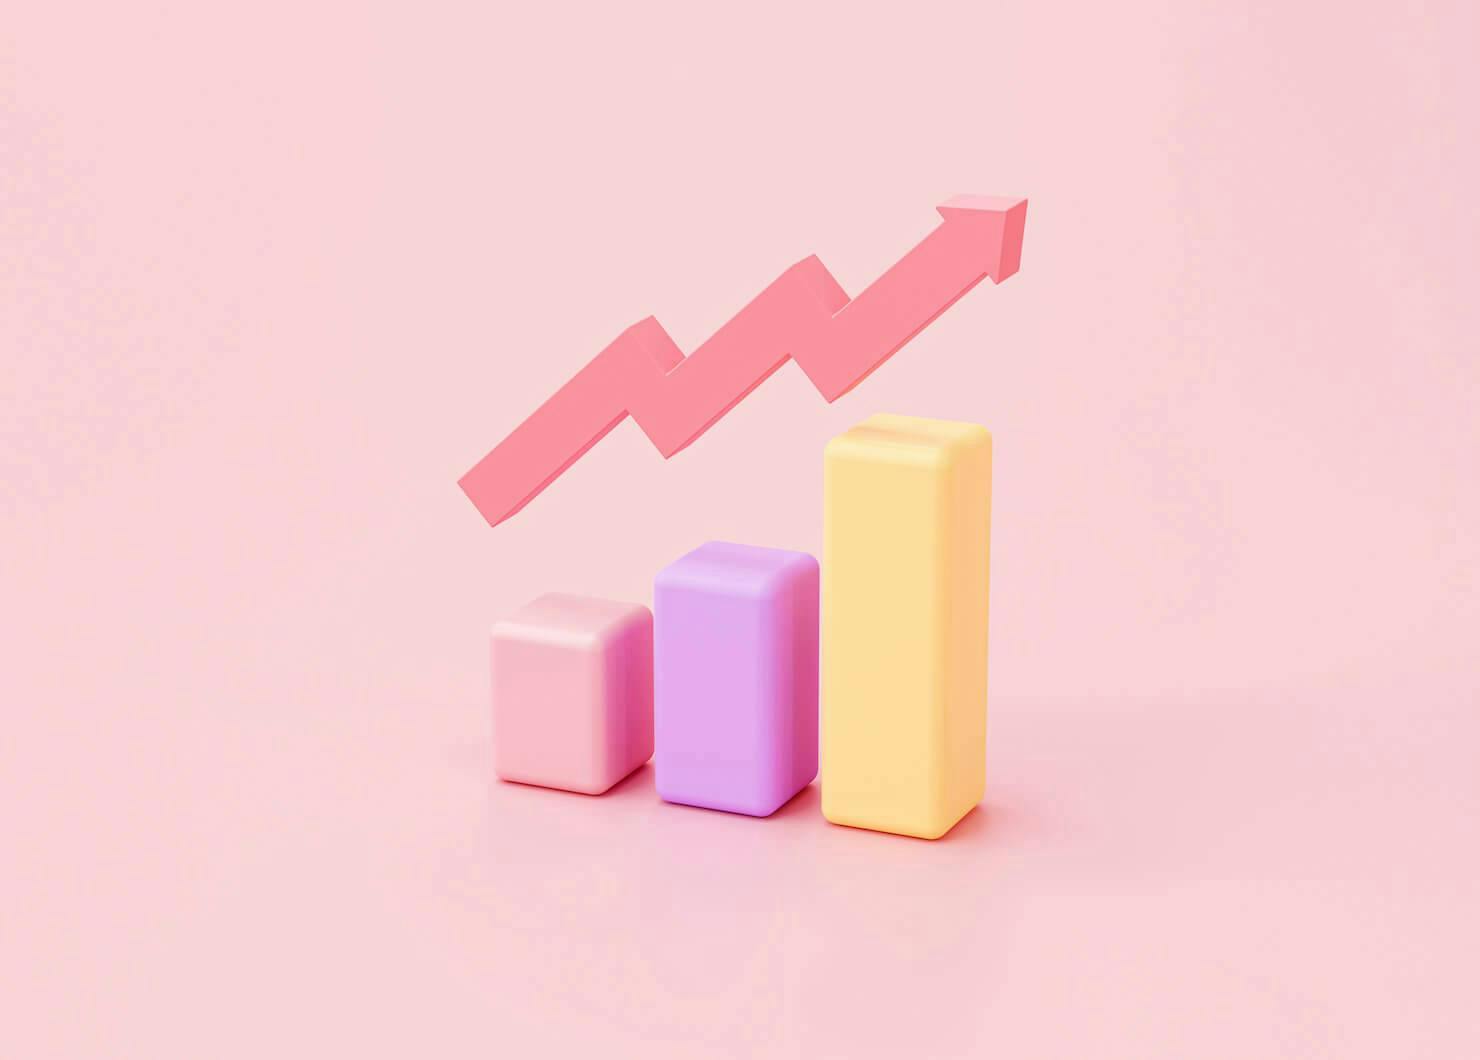 3D Illustration of bars and a positive trend line